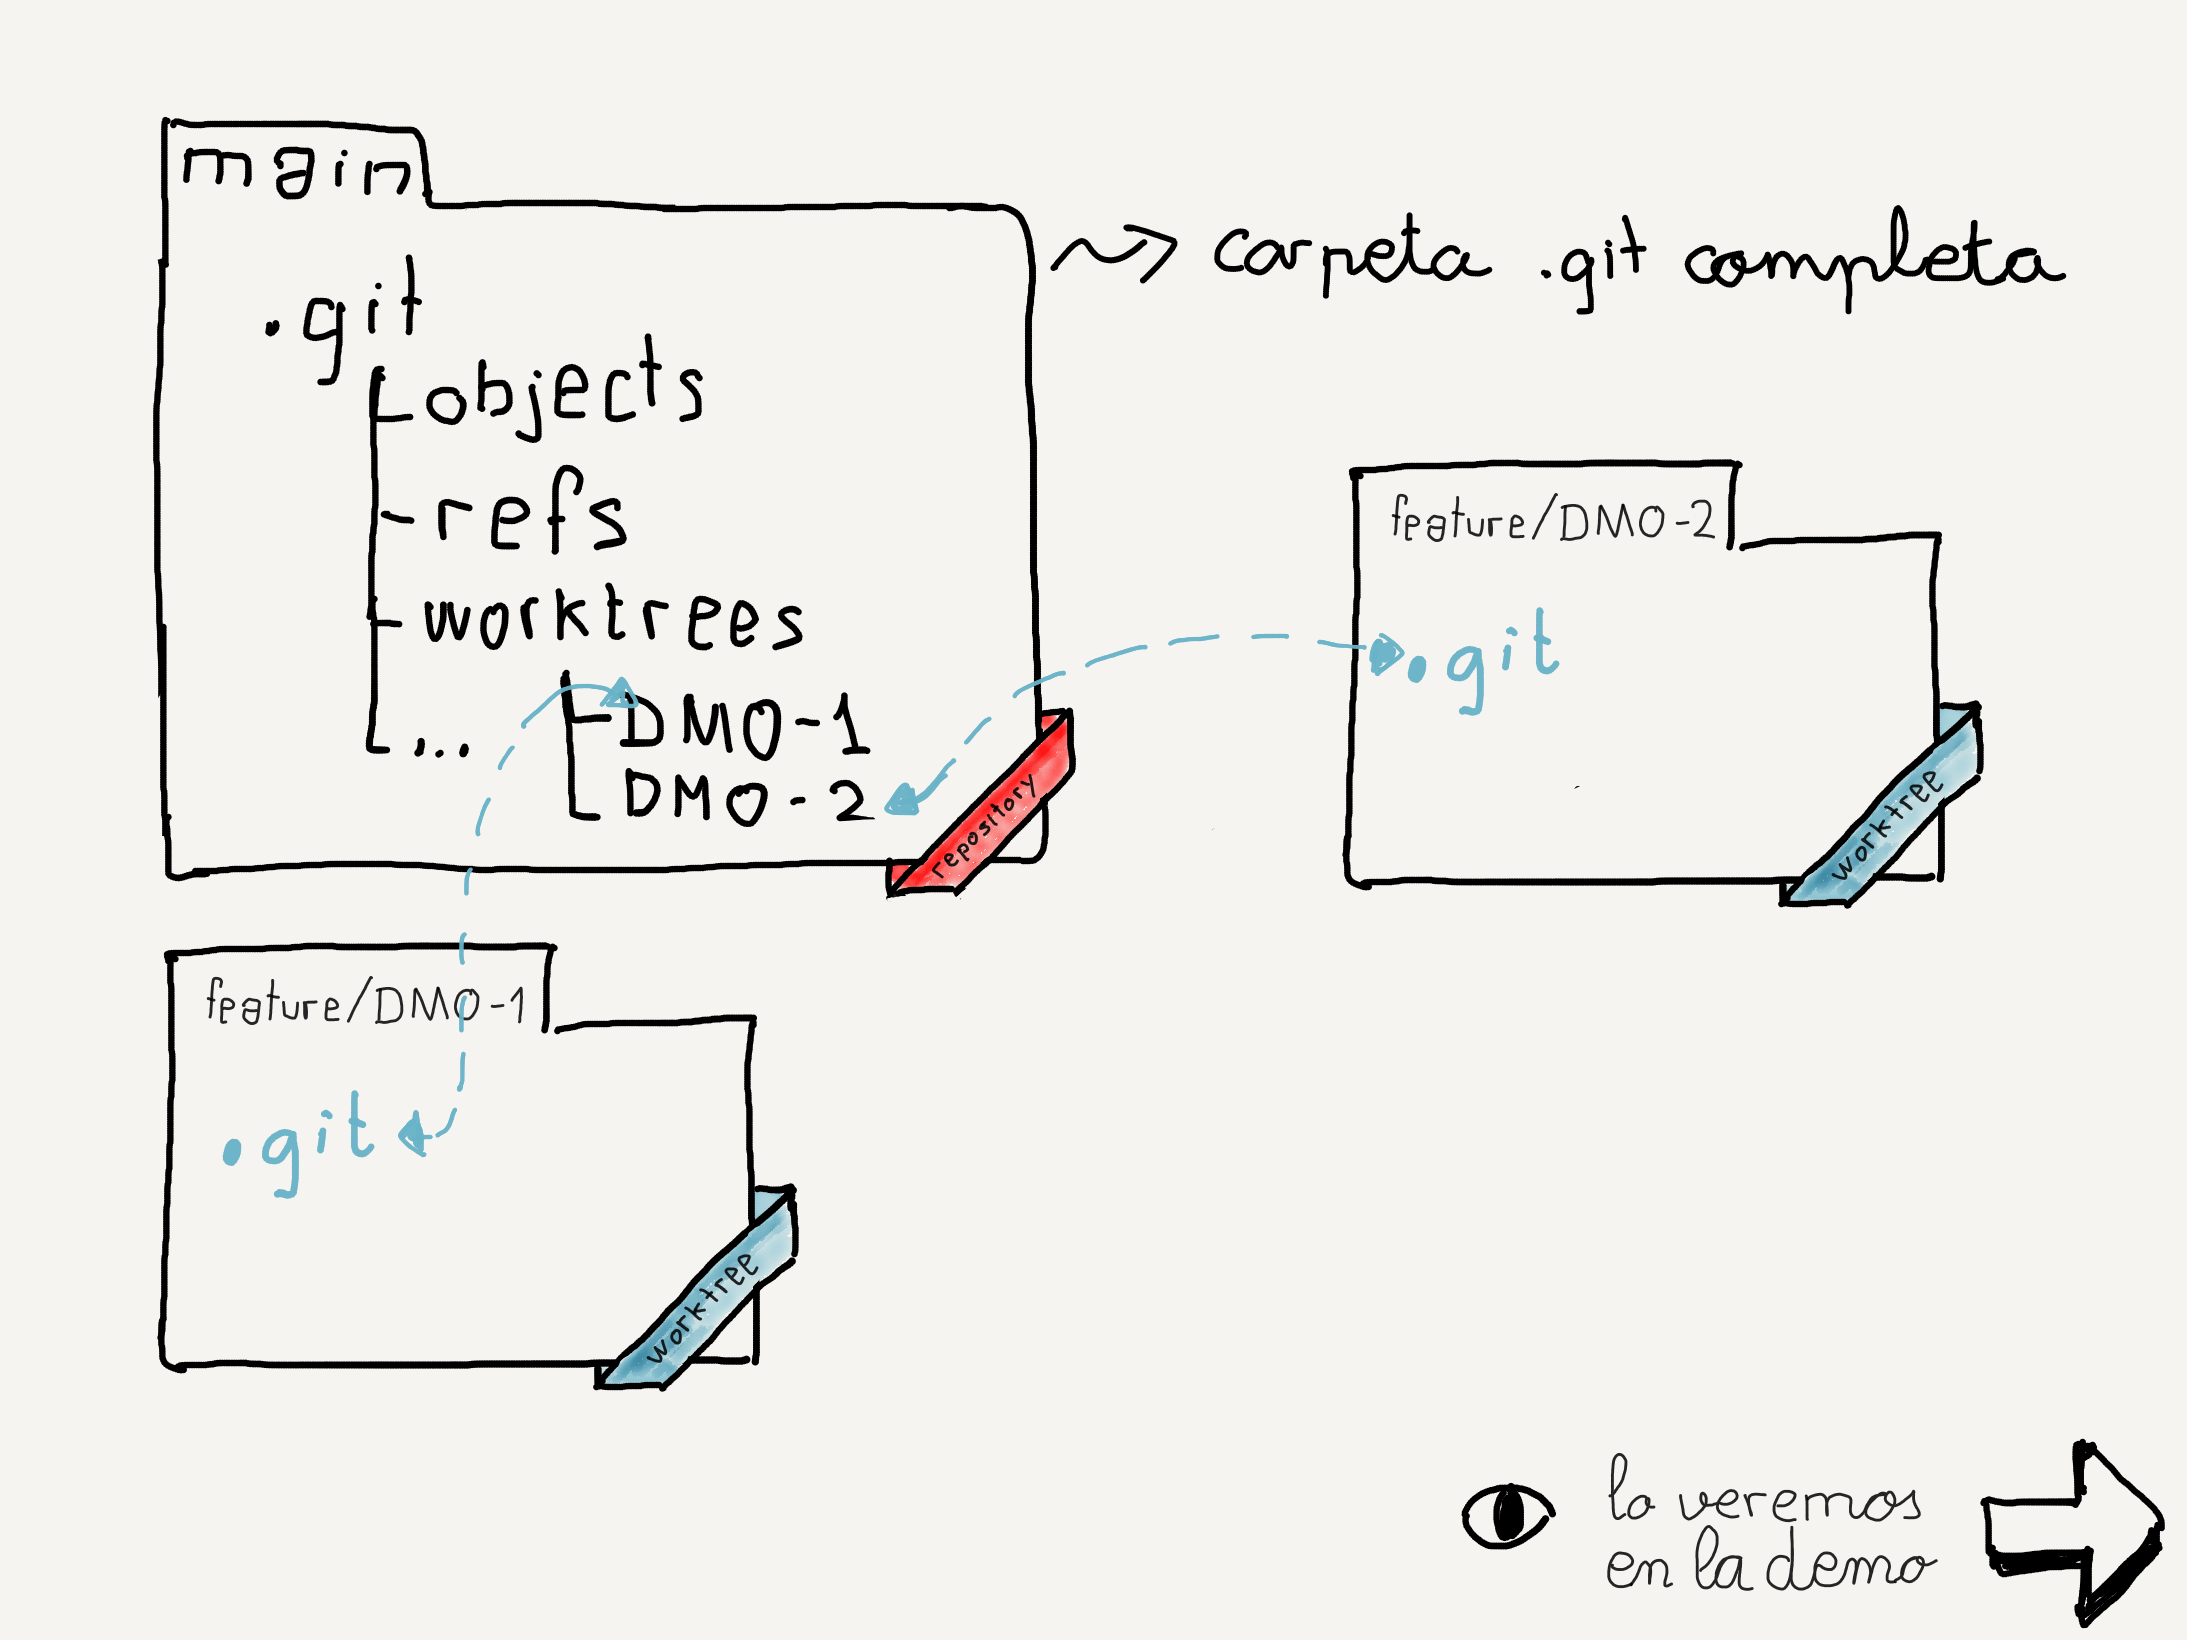 images/Paper.Talk_Git_worktrees.6.PNG